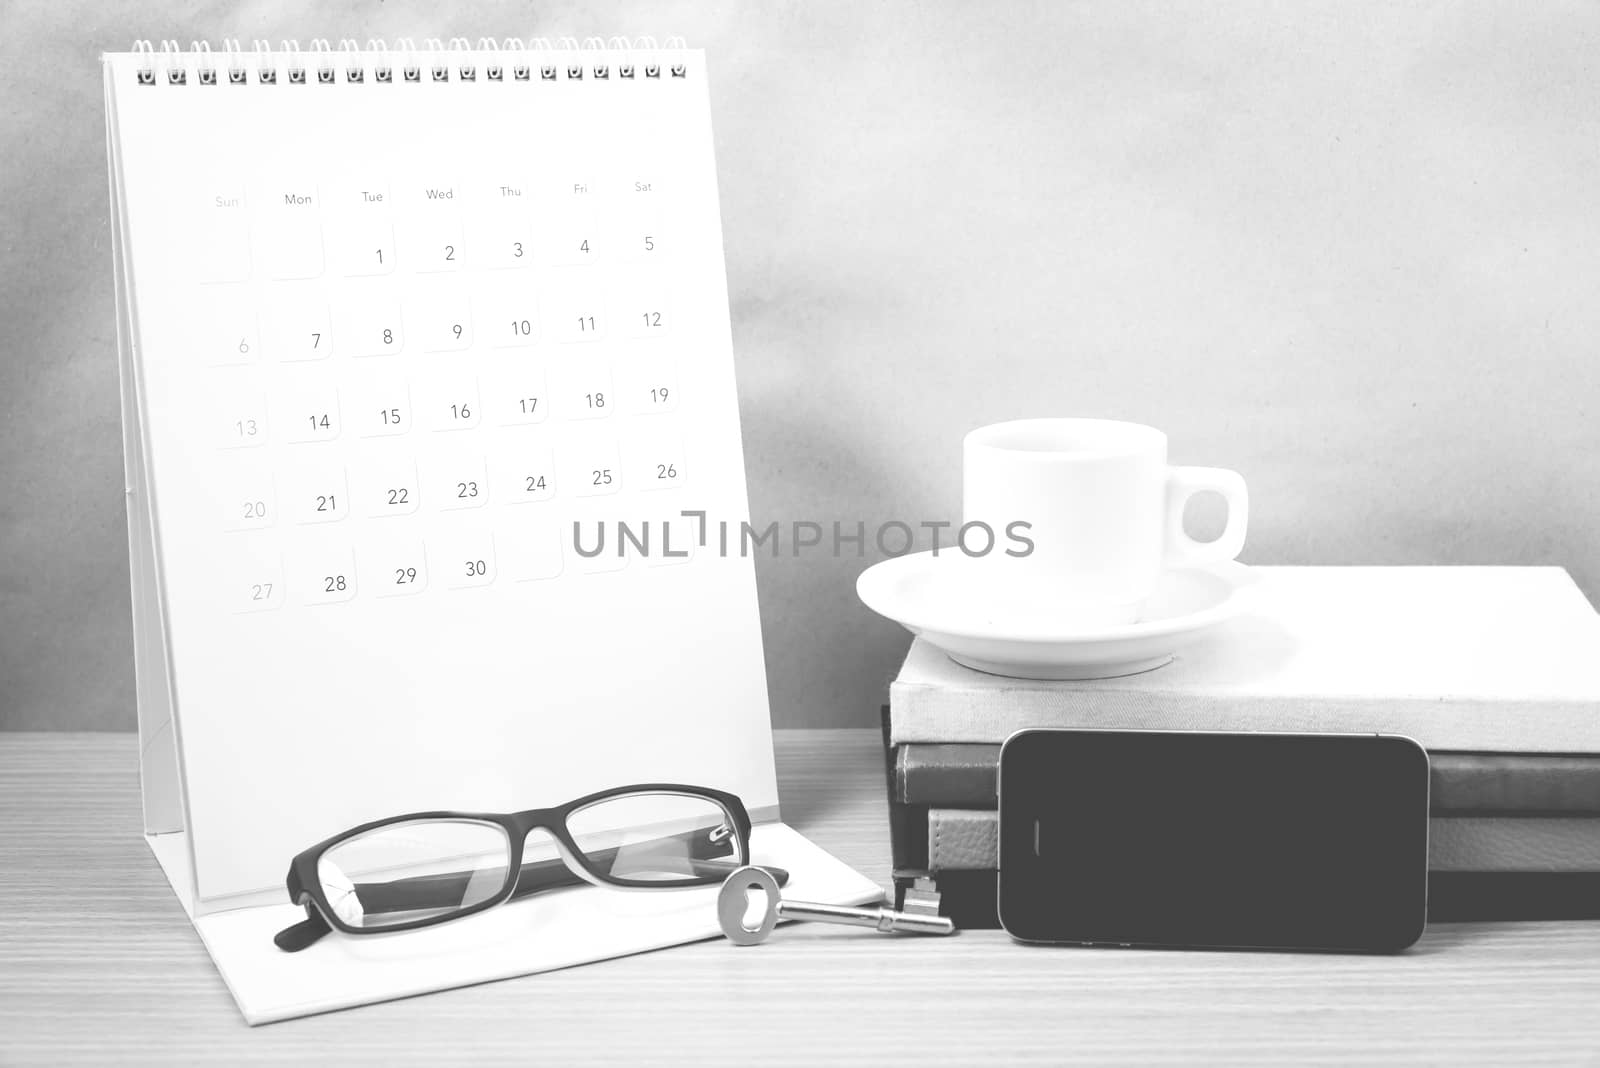 coffee and phone with key,eyeglasses,stack of book,calendar on wood background black and white color